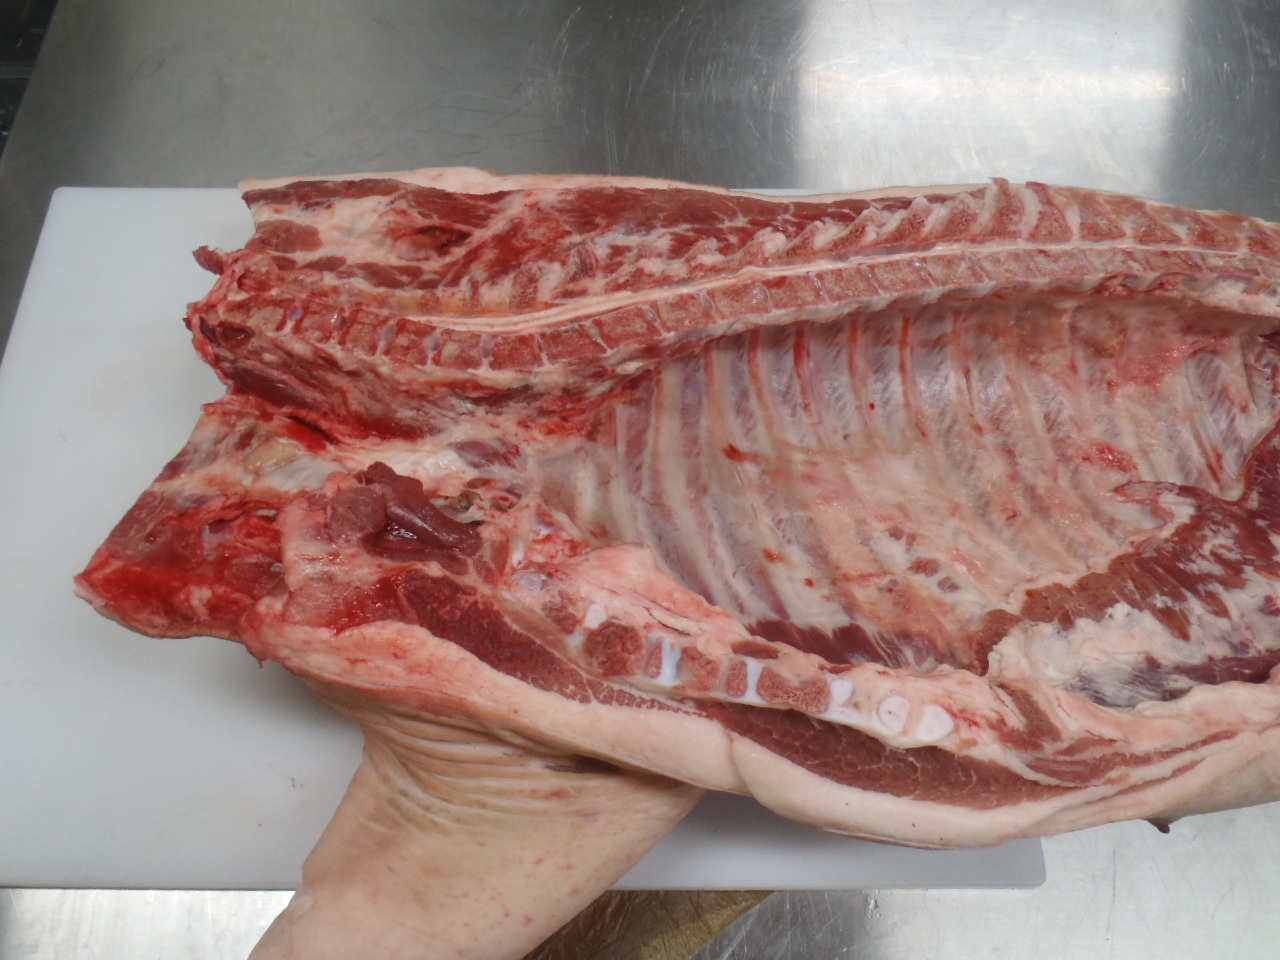 The front end of the side of pork